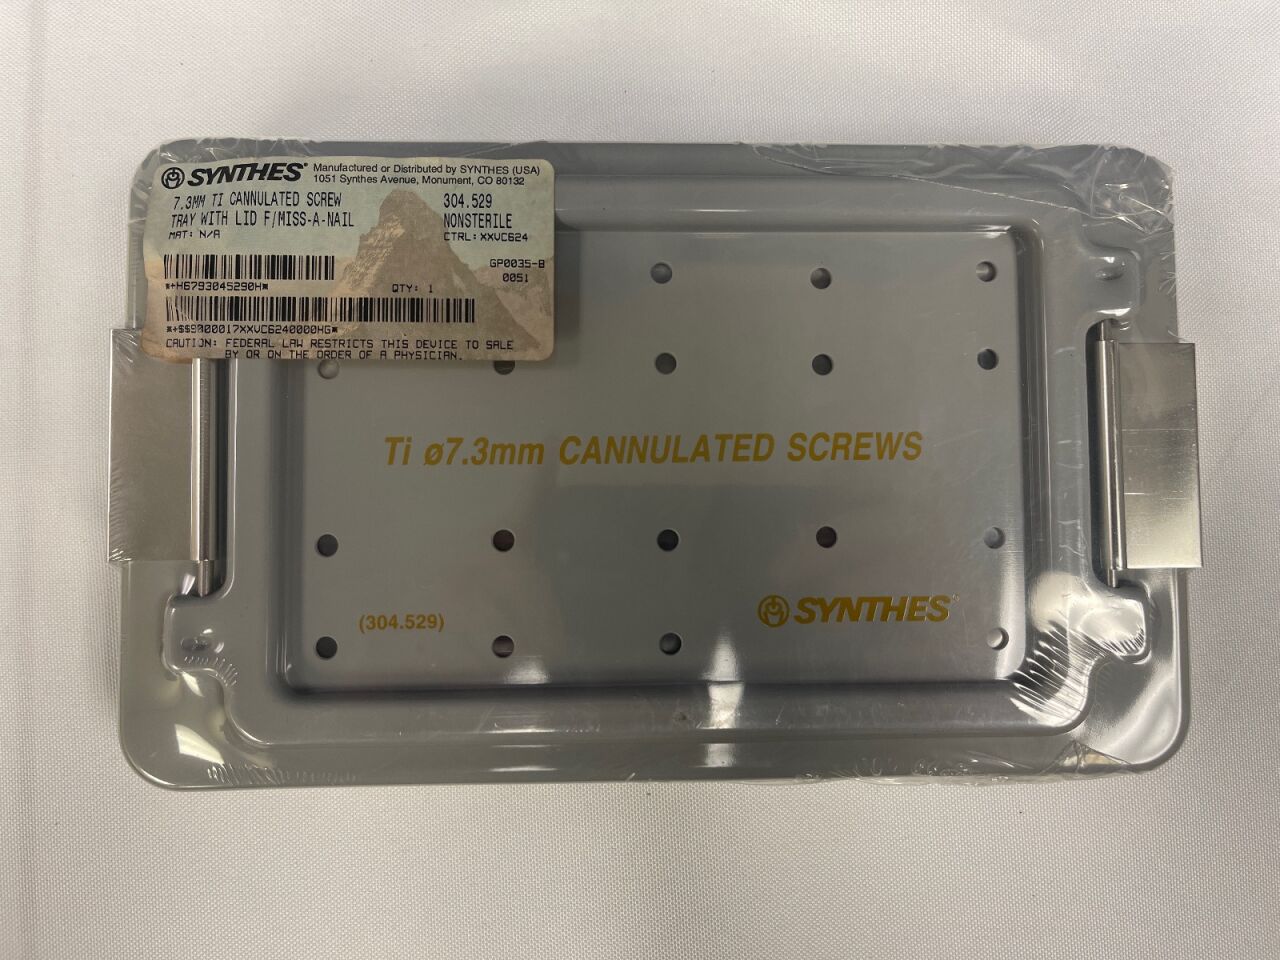 NEW 304.529 7.3MM TI Cannulated Screw Tray w/ Lid CCMED287